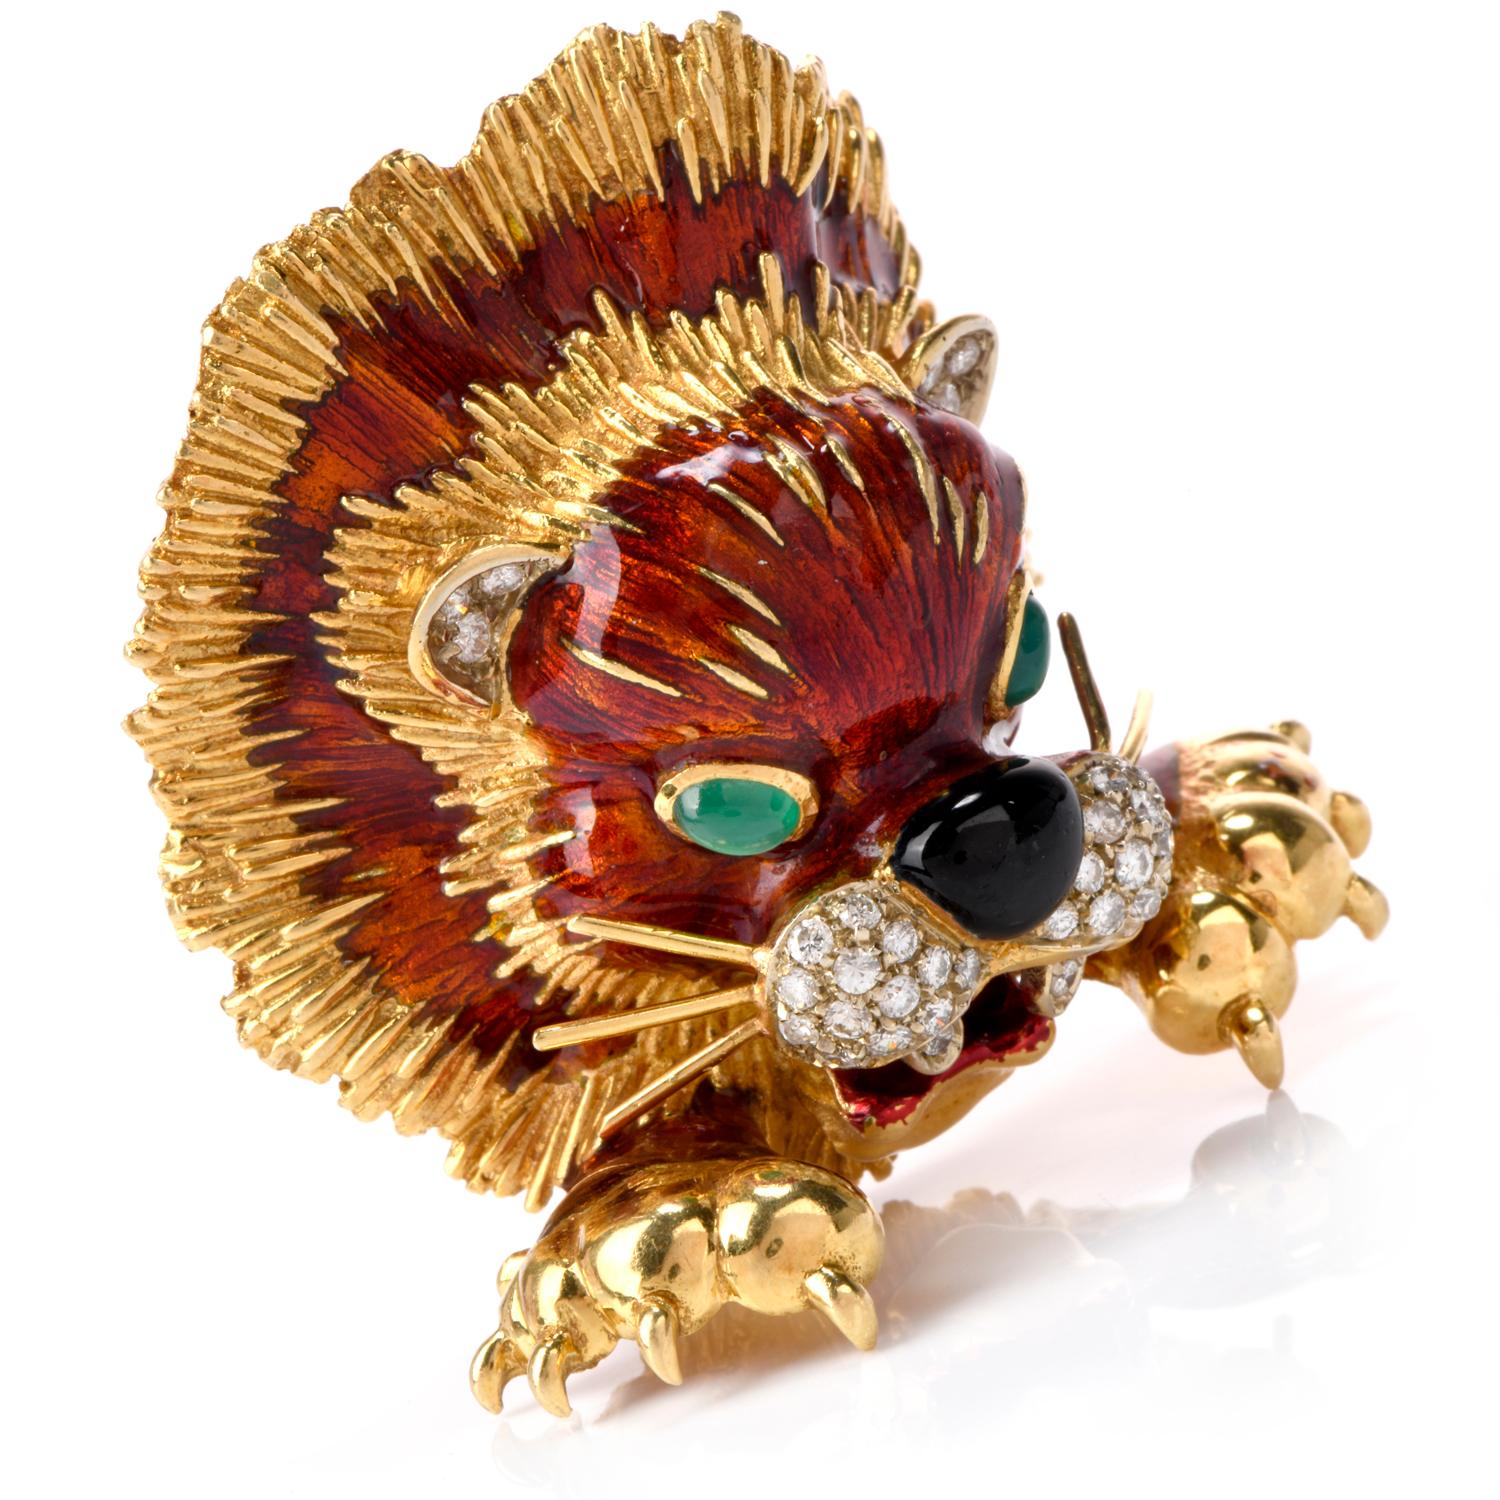 This Mid Century Italian designer Enameled Brooch was designed by Italian designer Frascarolo and inspired in a Roaring Lion Head motif.  This 18K gold brooch is ready to lunge forward as it looks through the eyes of green Onyx.  Glistening Diamond